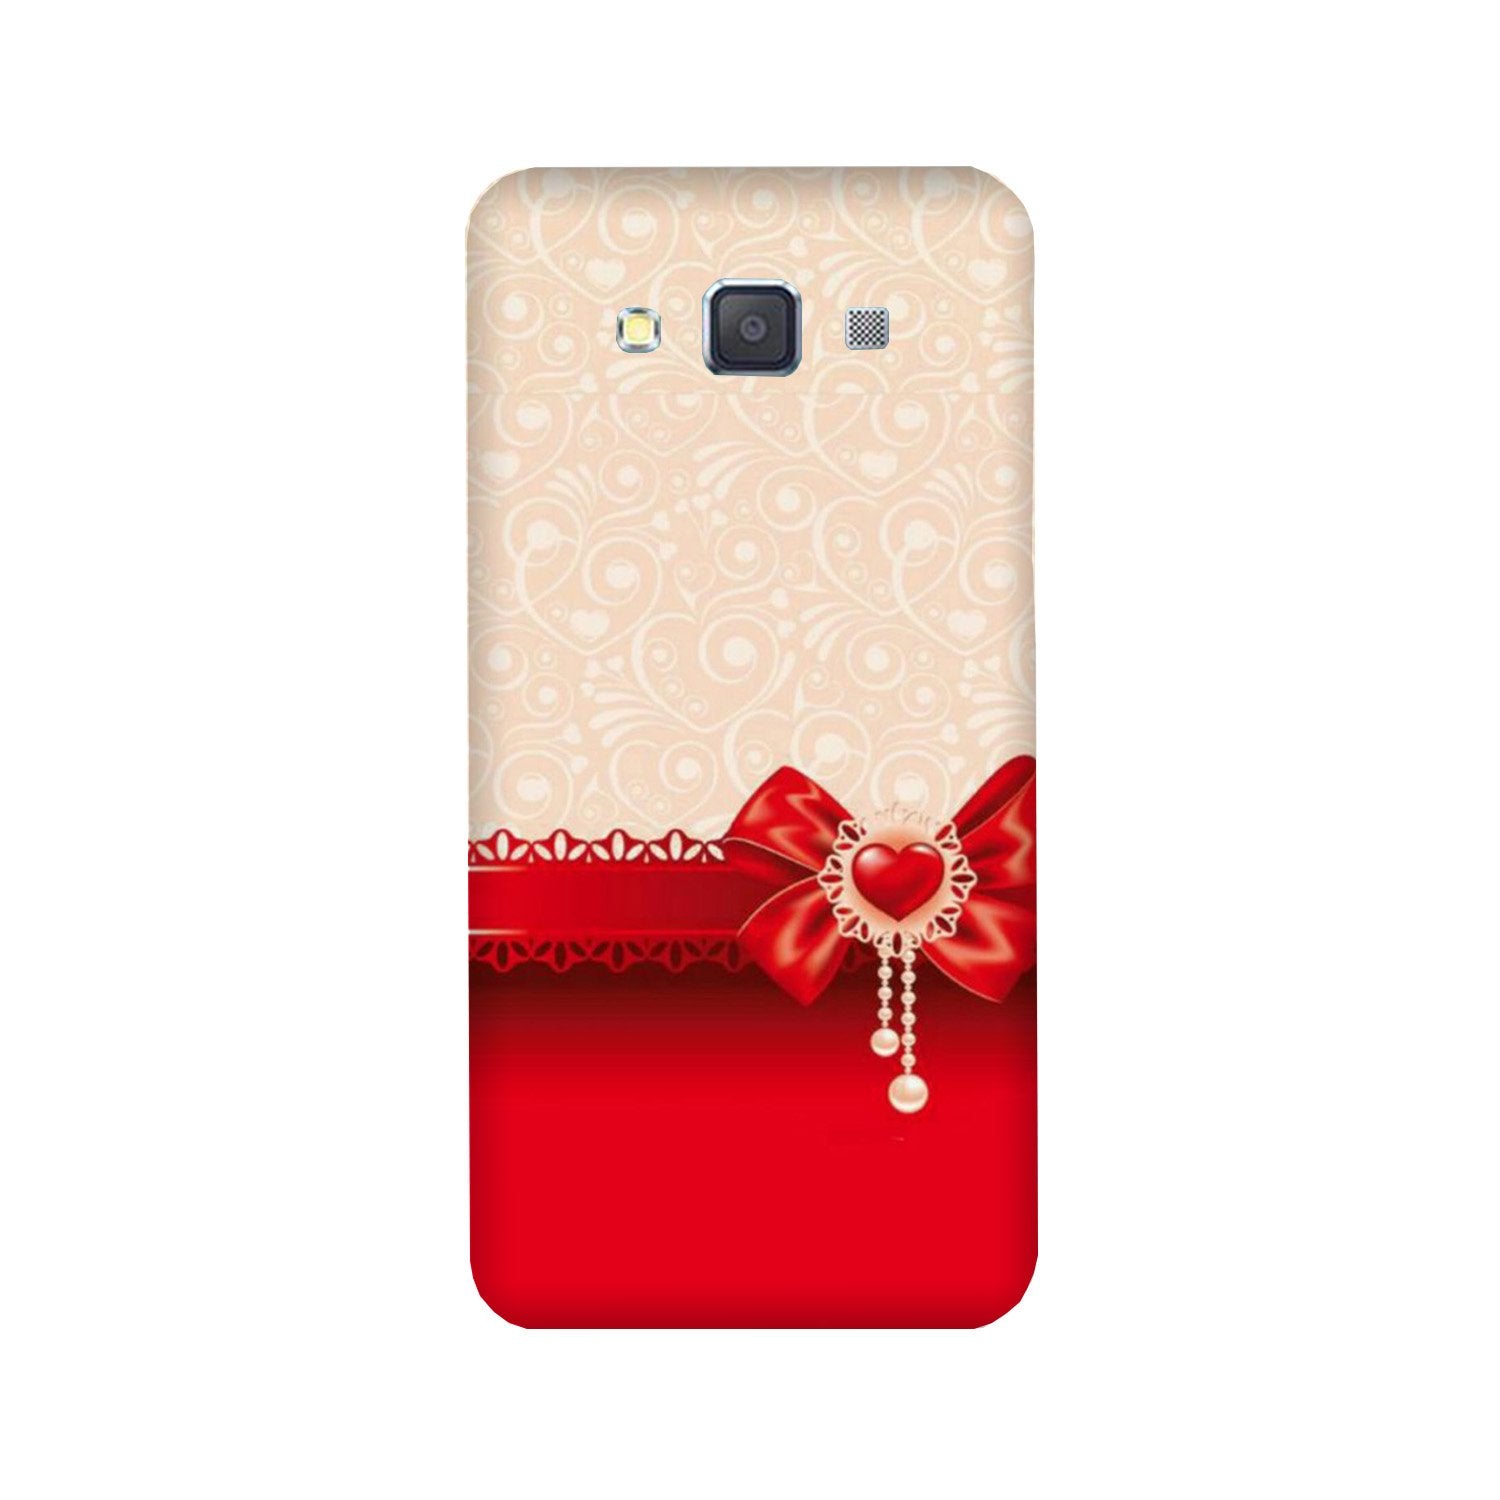 Gift Wrap3 Case for Galaxy A5 (2015)